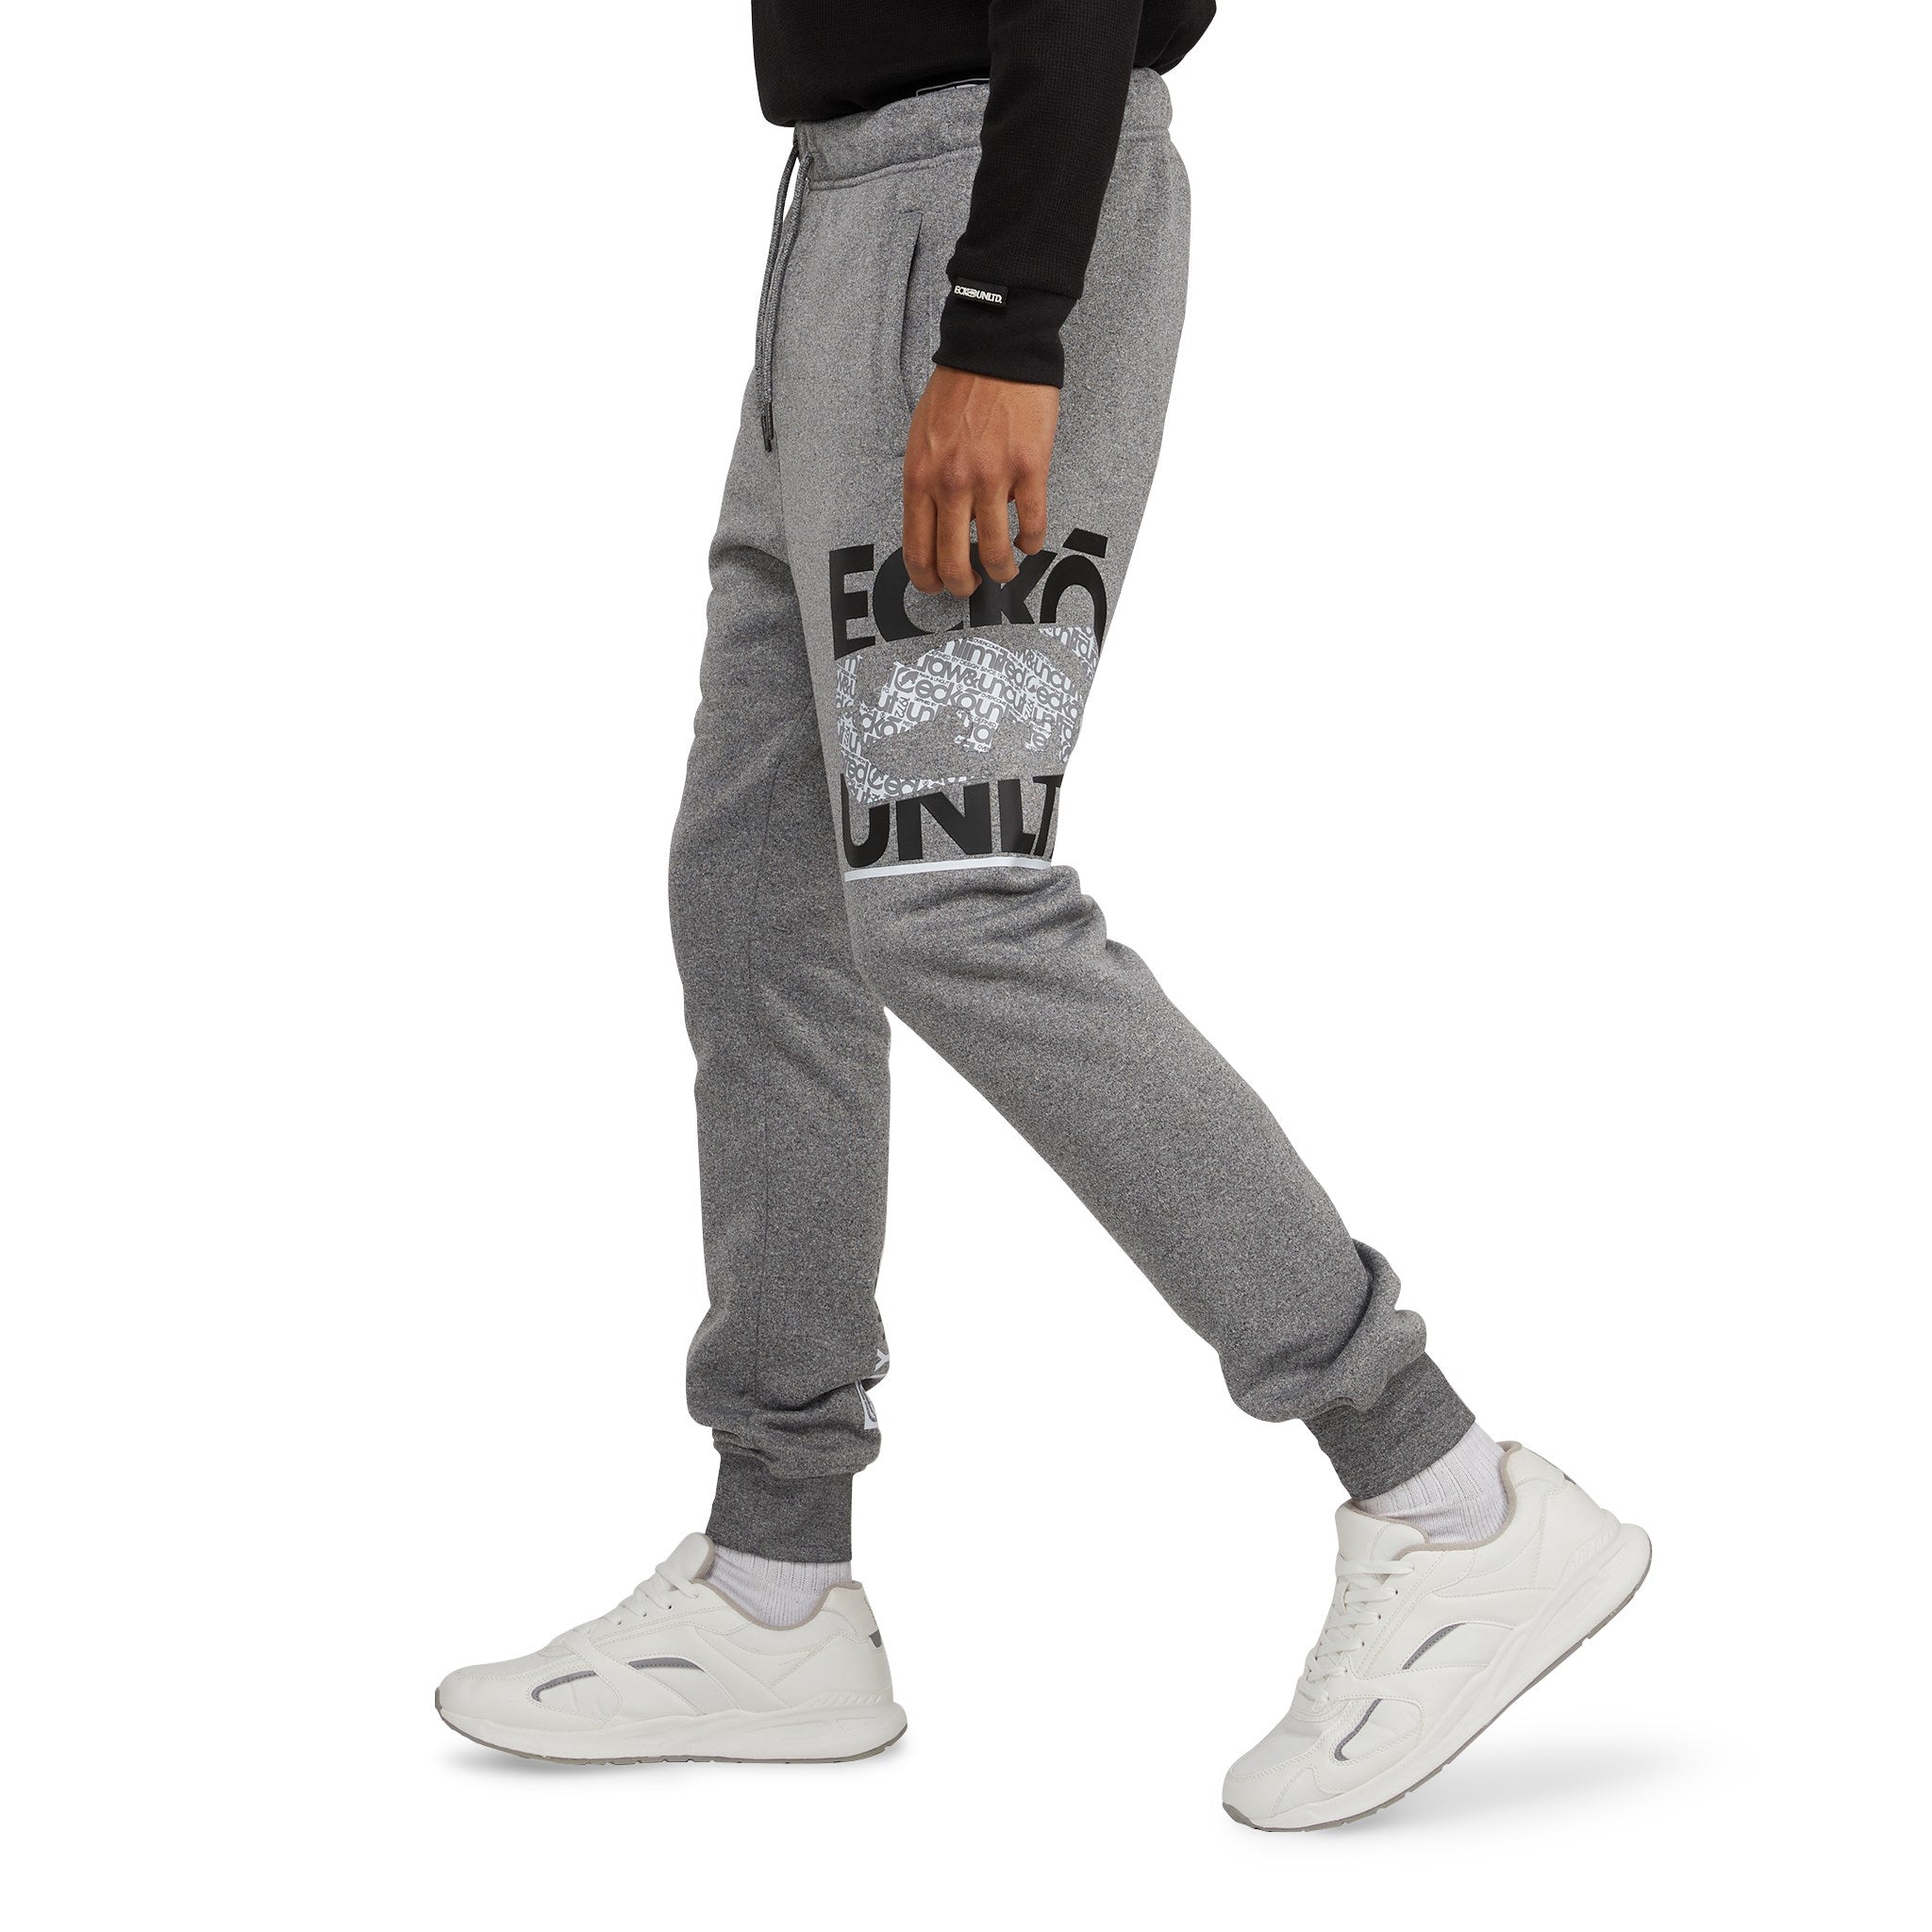 Over and Under Fleece Jogger